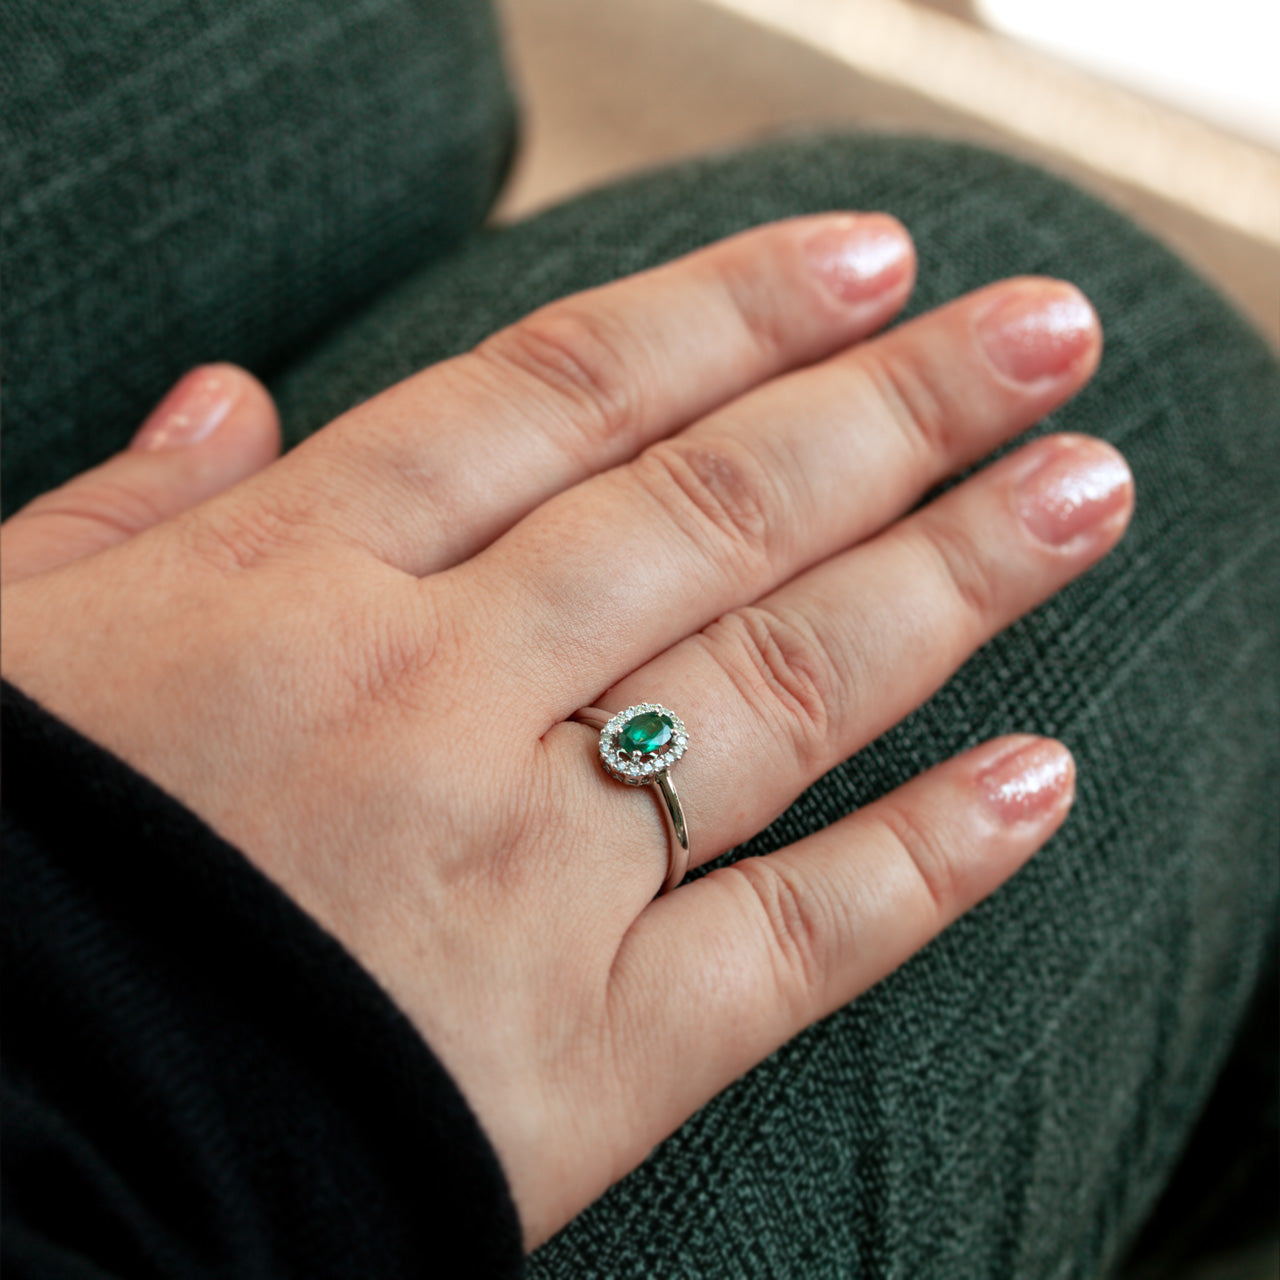 Close-up of a woman's hand wearing an 18k white gold Alexandrite ring with diamond halo